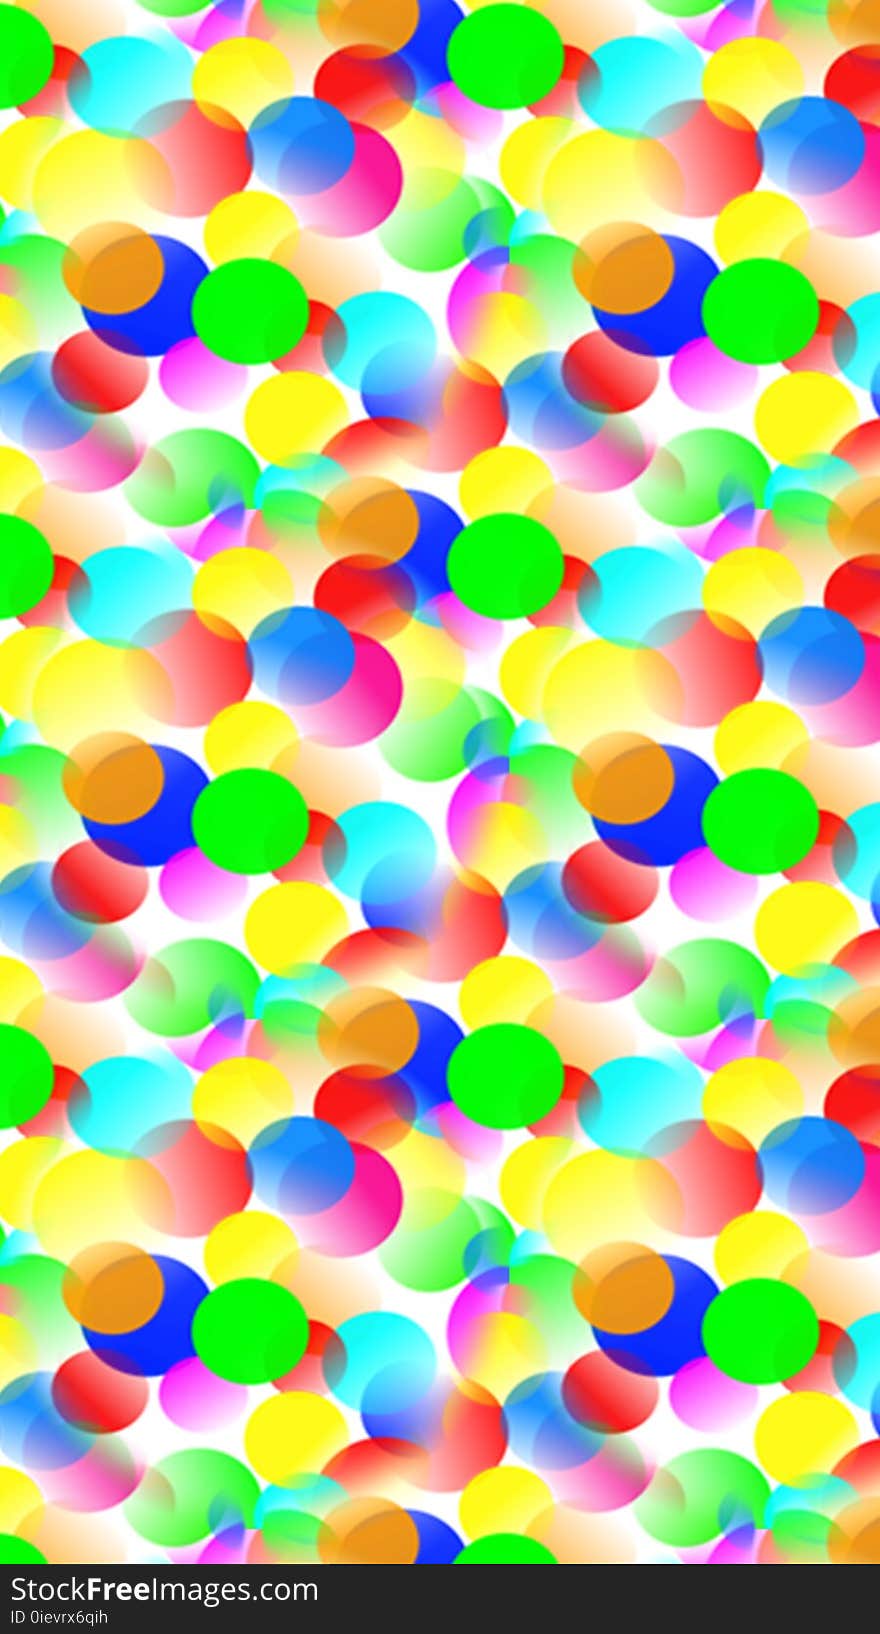 Colorful , playful and cheerful background for mobile screens. rainbow colors of bubbles and circles. Colorful , playful and cheerful background for mobile screens. rainbow colors of bubbles and circles.